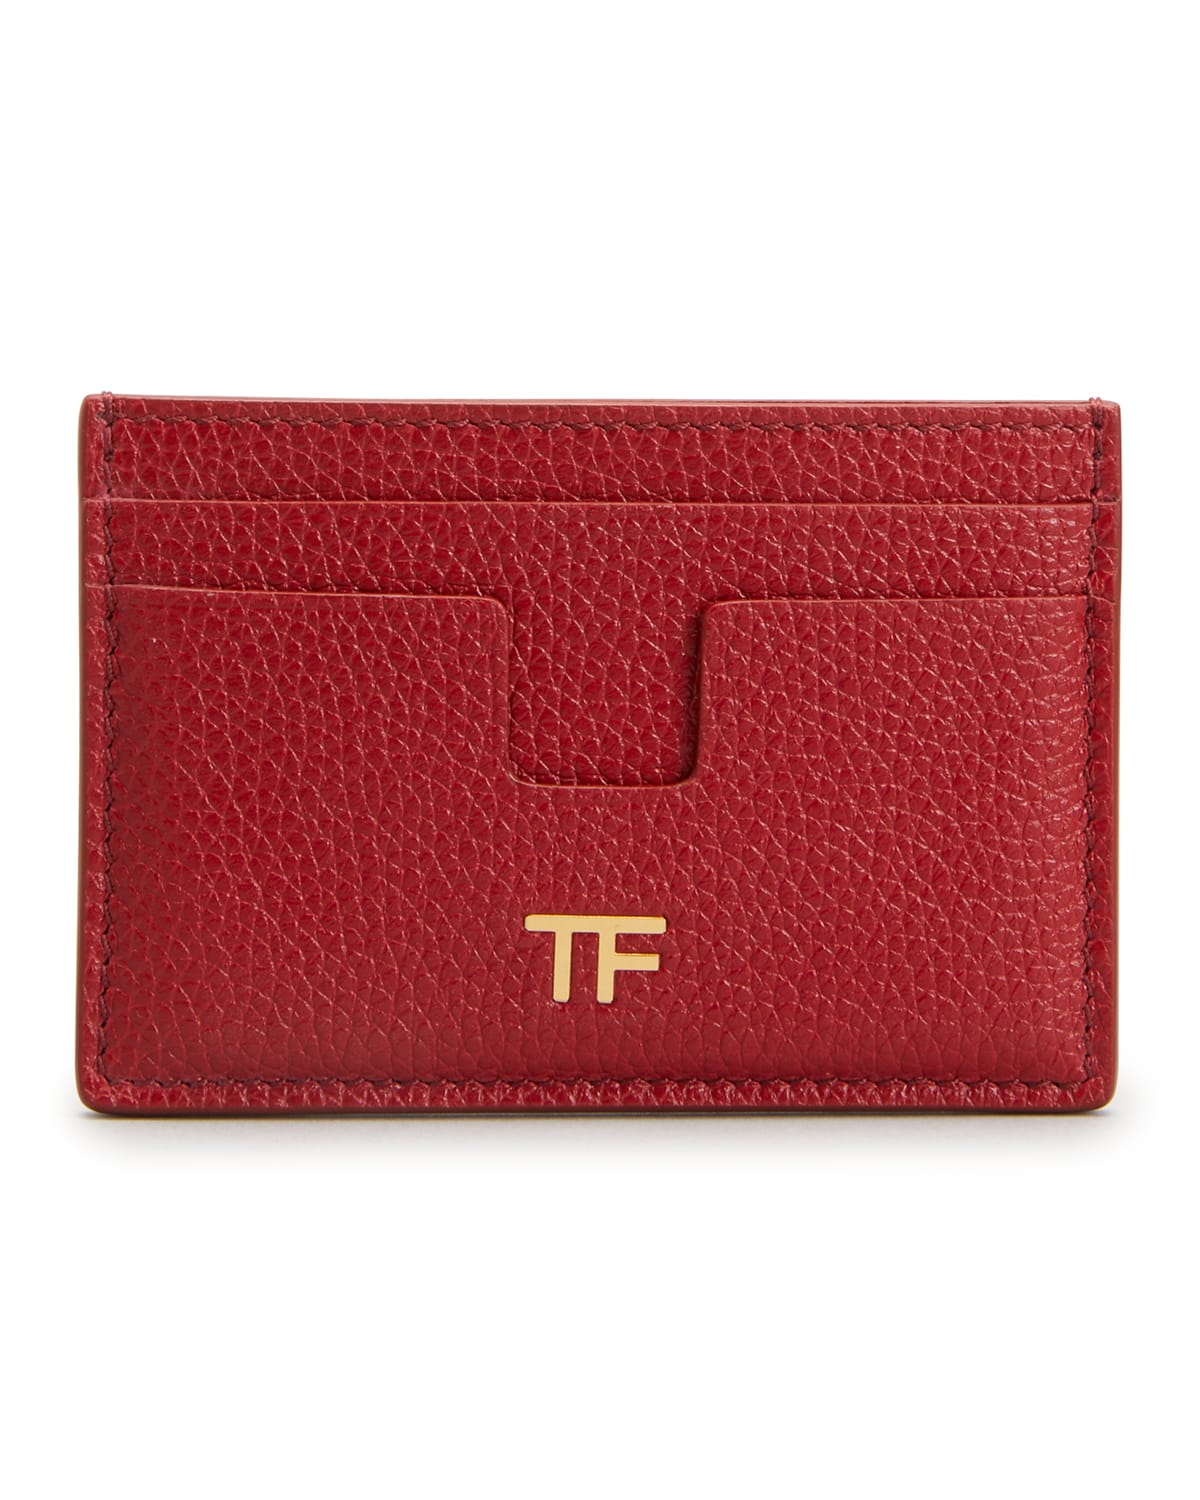 Tom Ford Classic Tf Leather Card Case In Jungle Red